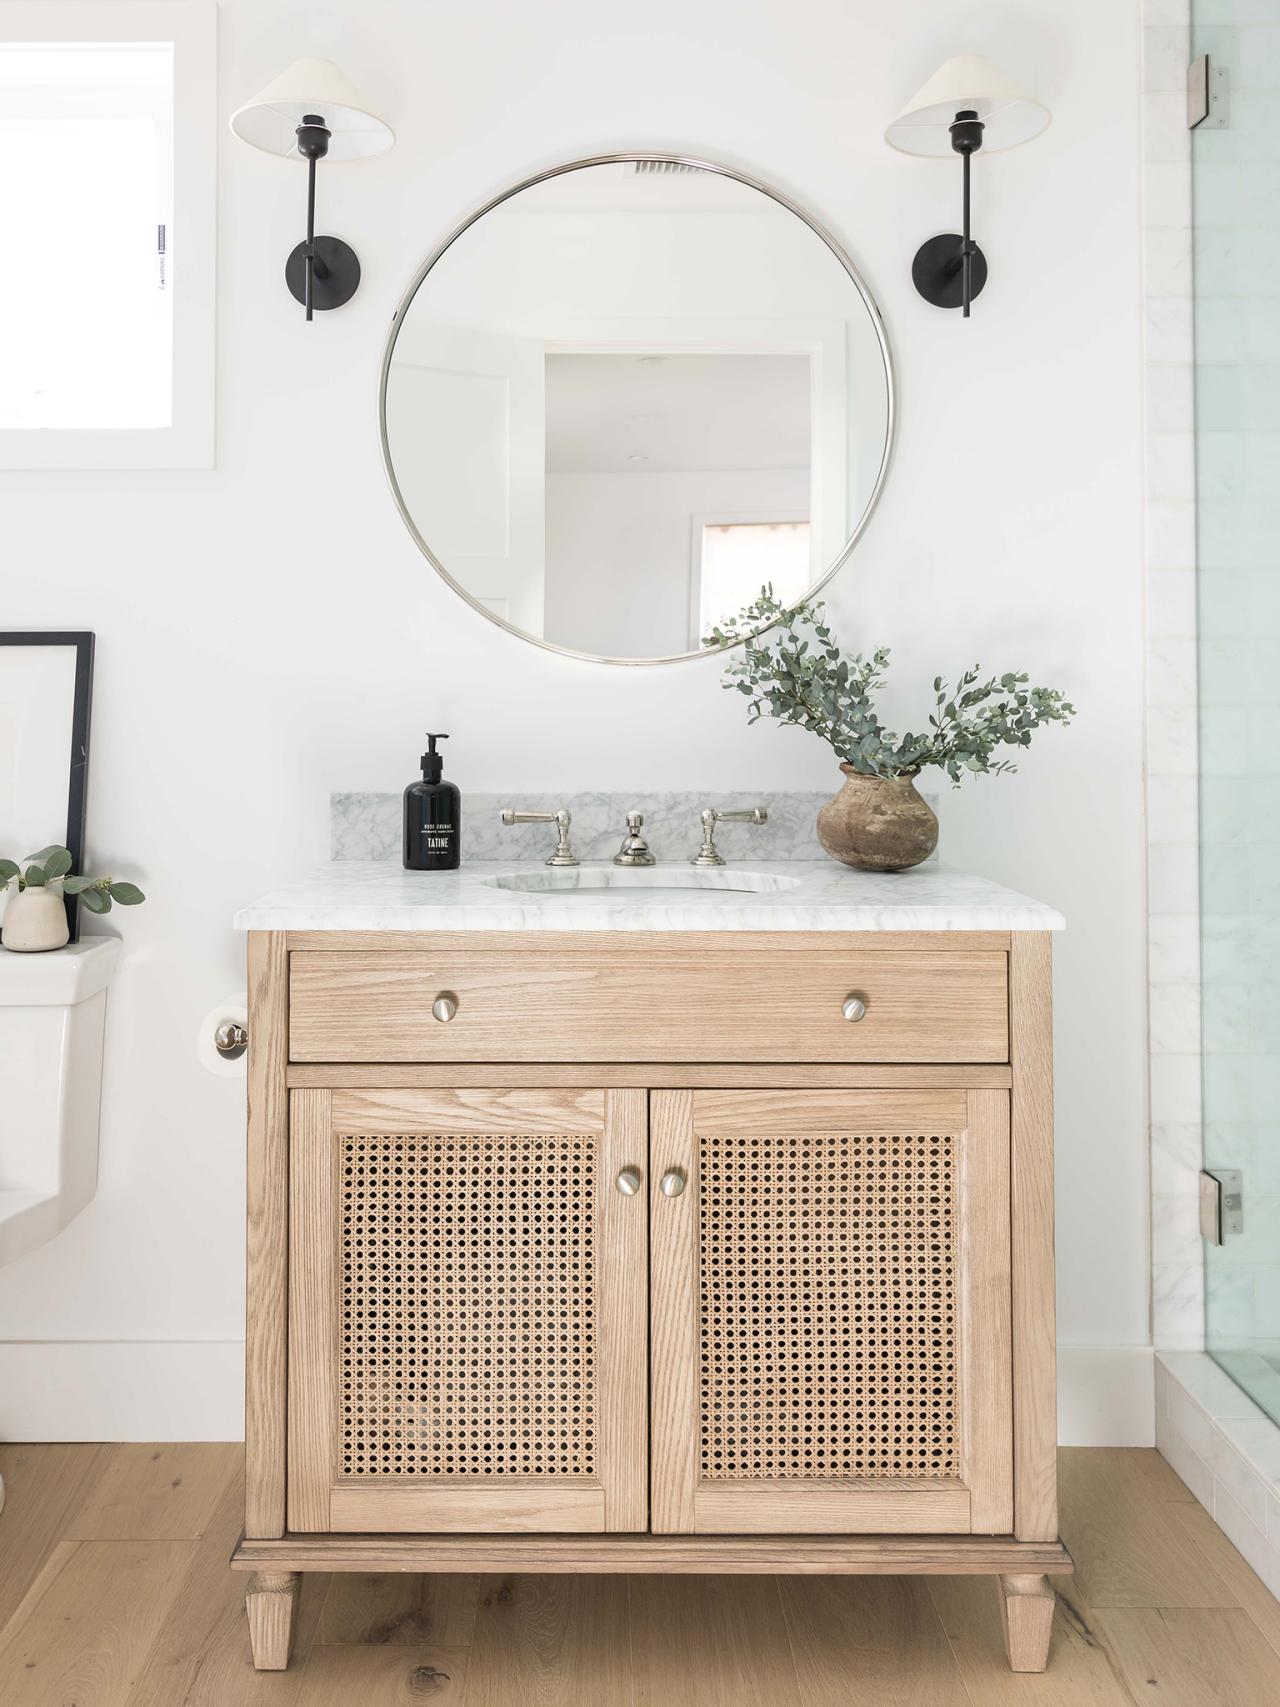 30 small bathroom ideas for Creating Style in Limited Spaces